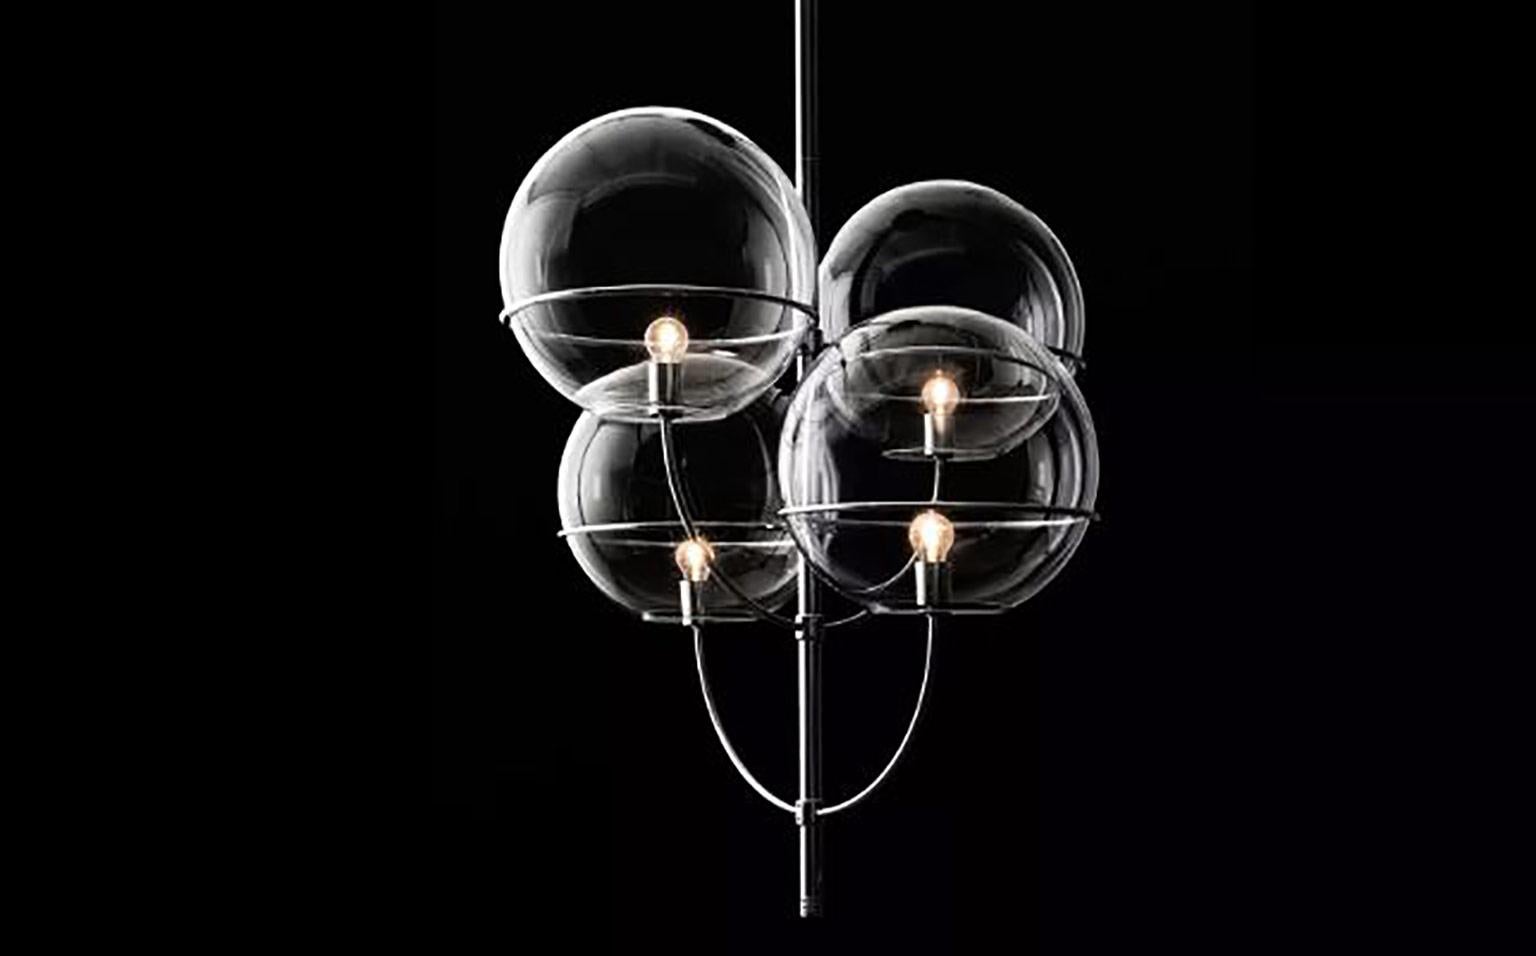 Lyndon suspension lamp designed by Vico Magistretti for Oluce. This fixture is constructed using a zinc-plated black lacquered metal armature. The globes are made from transparent polycarbonate and seem to float in the air but in a closer look, the